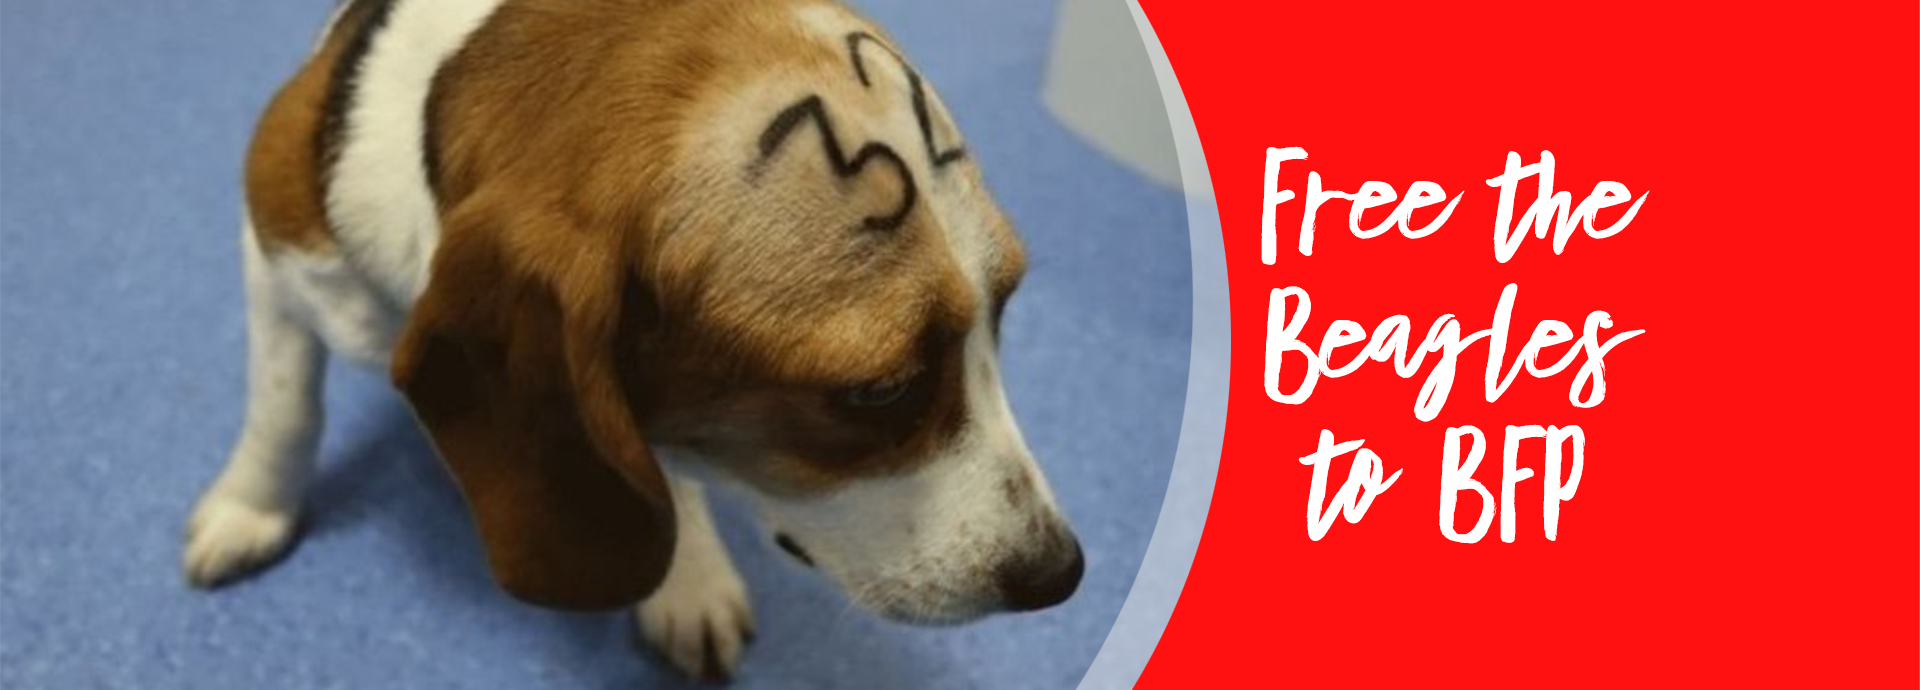 Free the beagles to BFP!